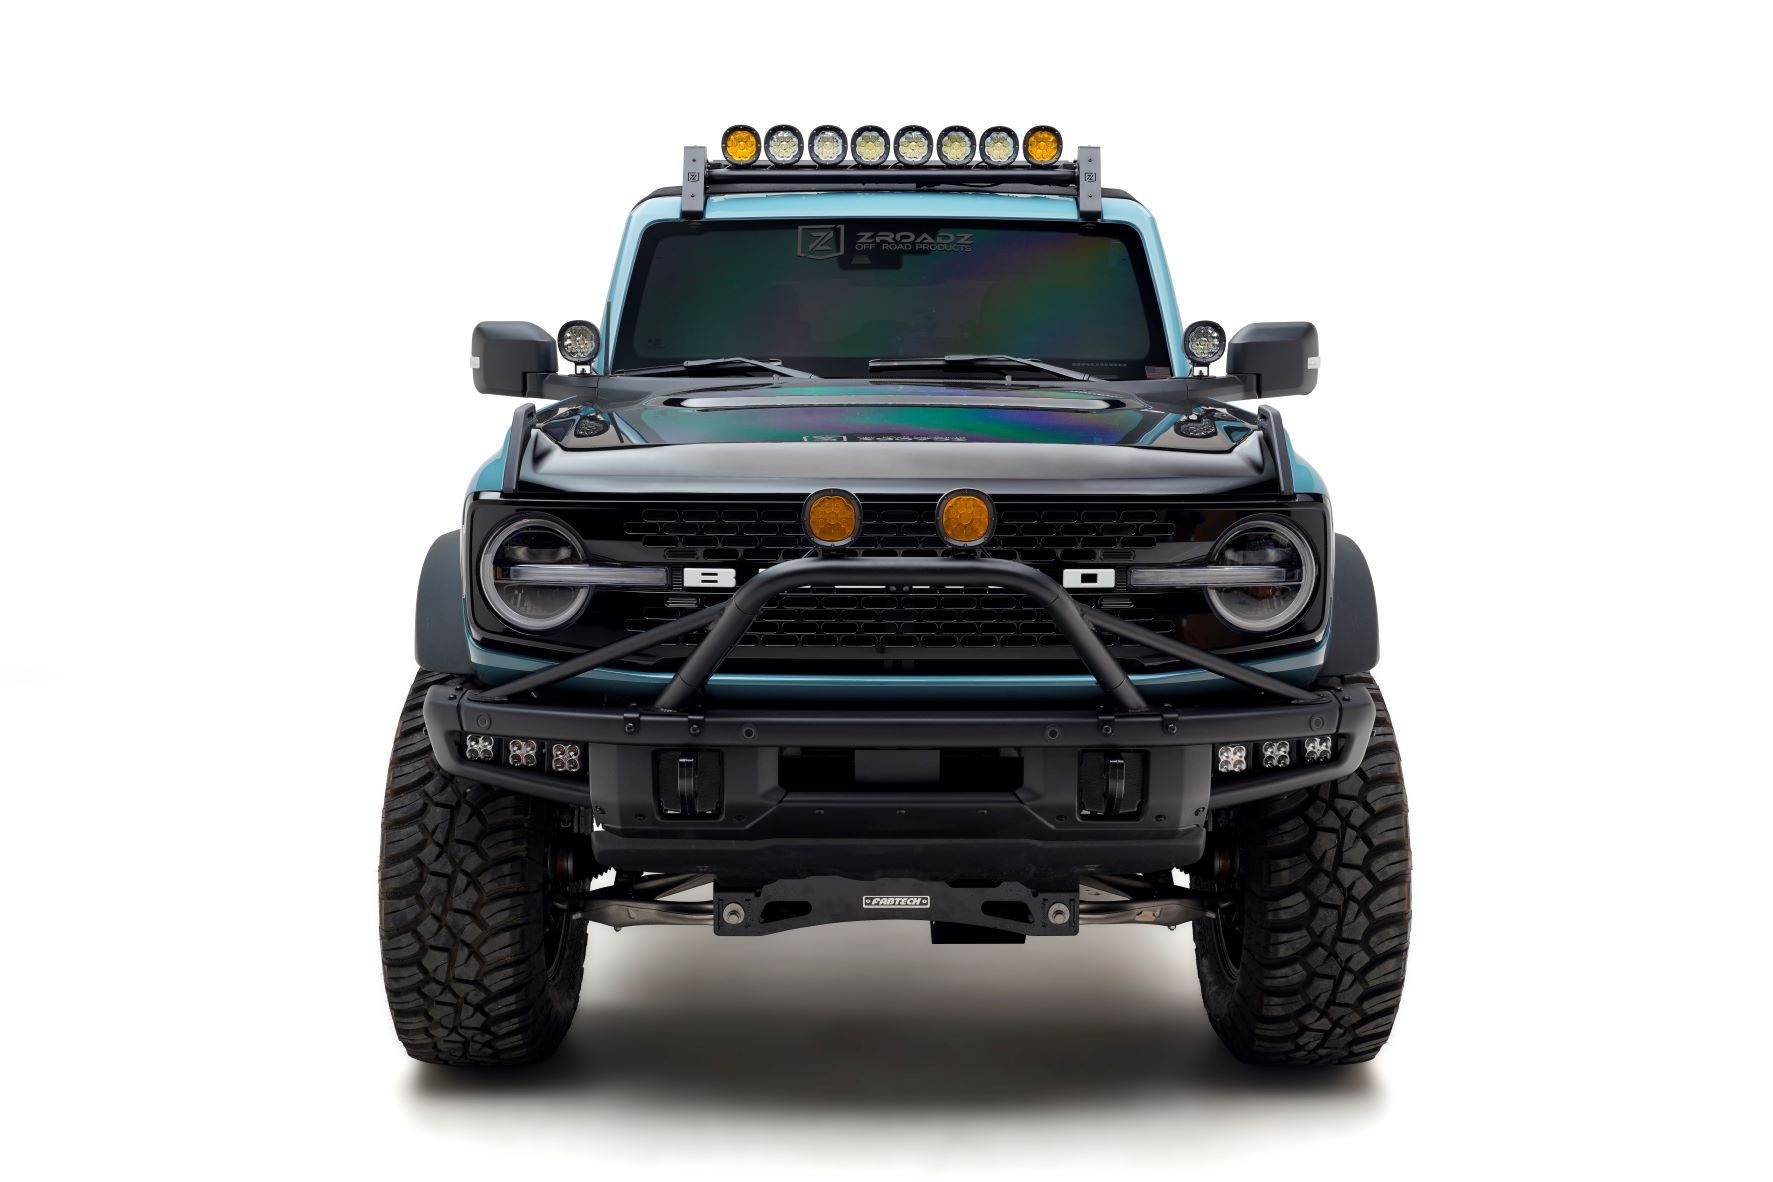 Ford Bronco Updated Soft Top Rack Images - ZROADZ OffRoad Ford Bronco Soft_Hard Top Rack LED Kits (1)